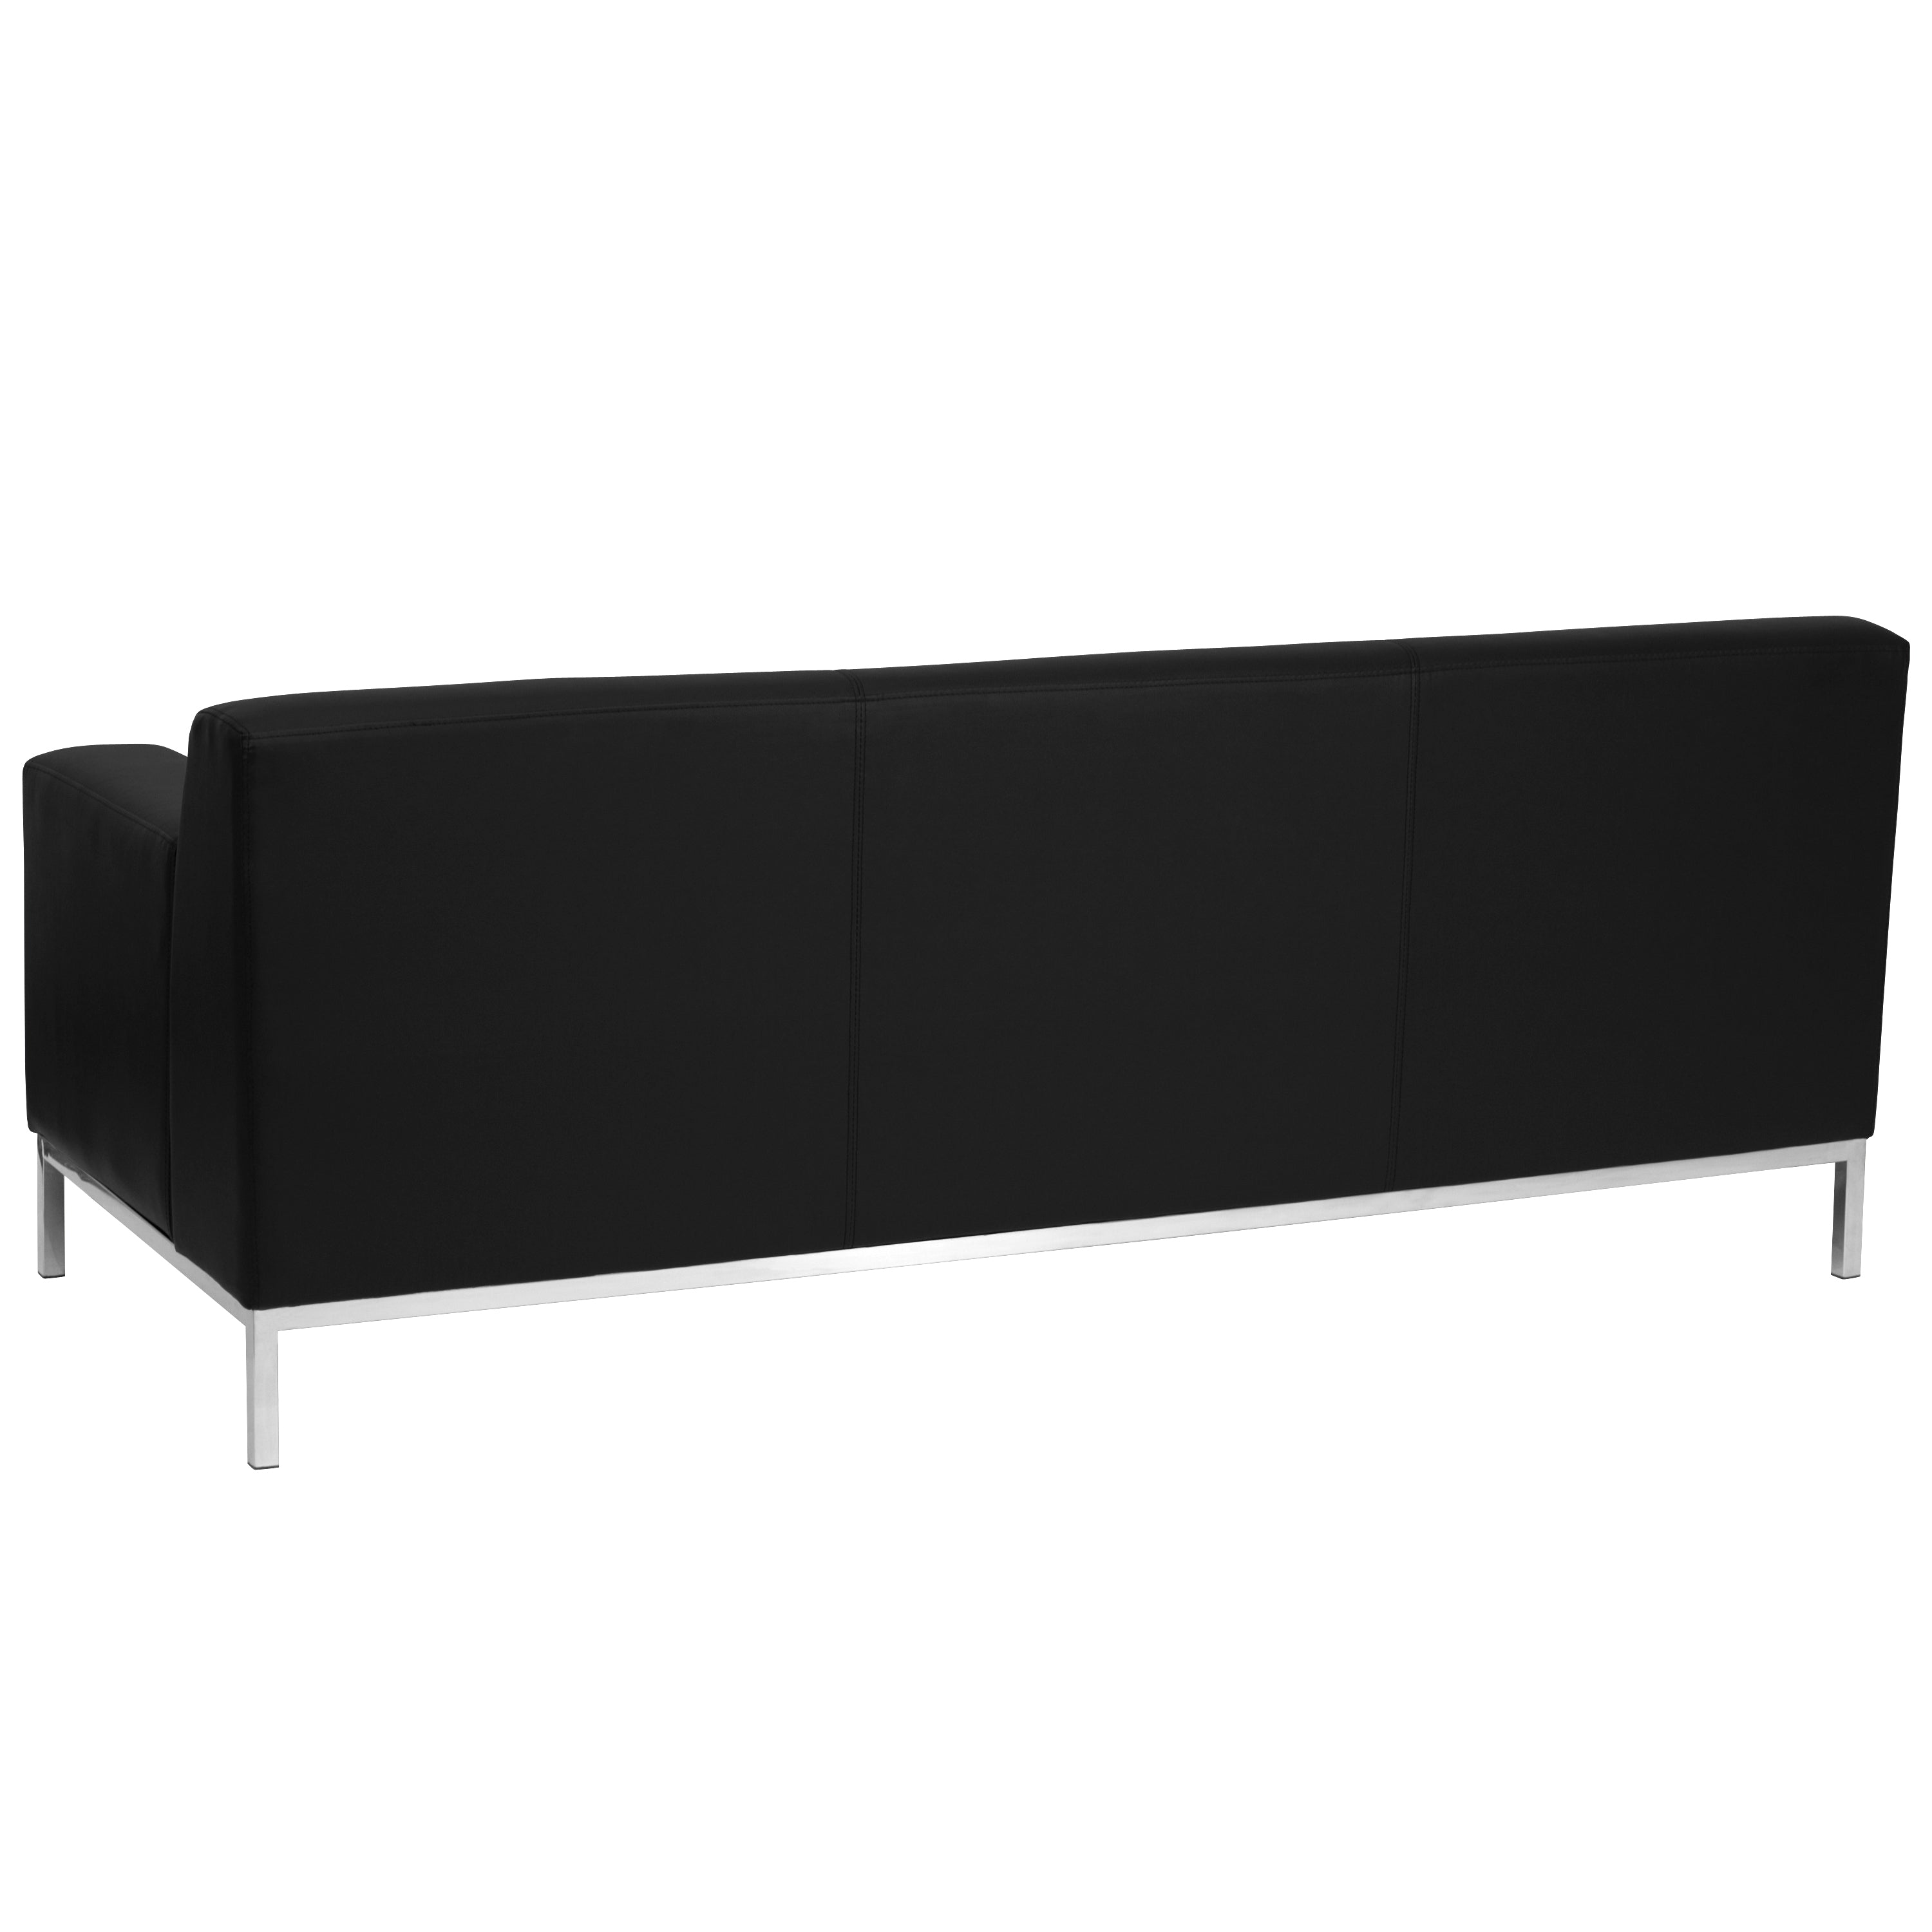 HERCULES Definity Series Contemporary LeatherSoft Sofa with Line Stitching and Integrated Stainless Steel Frame-Reception Sofa-Flash Furniture-Wall2Wall Furnishings